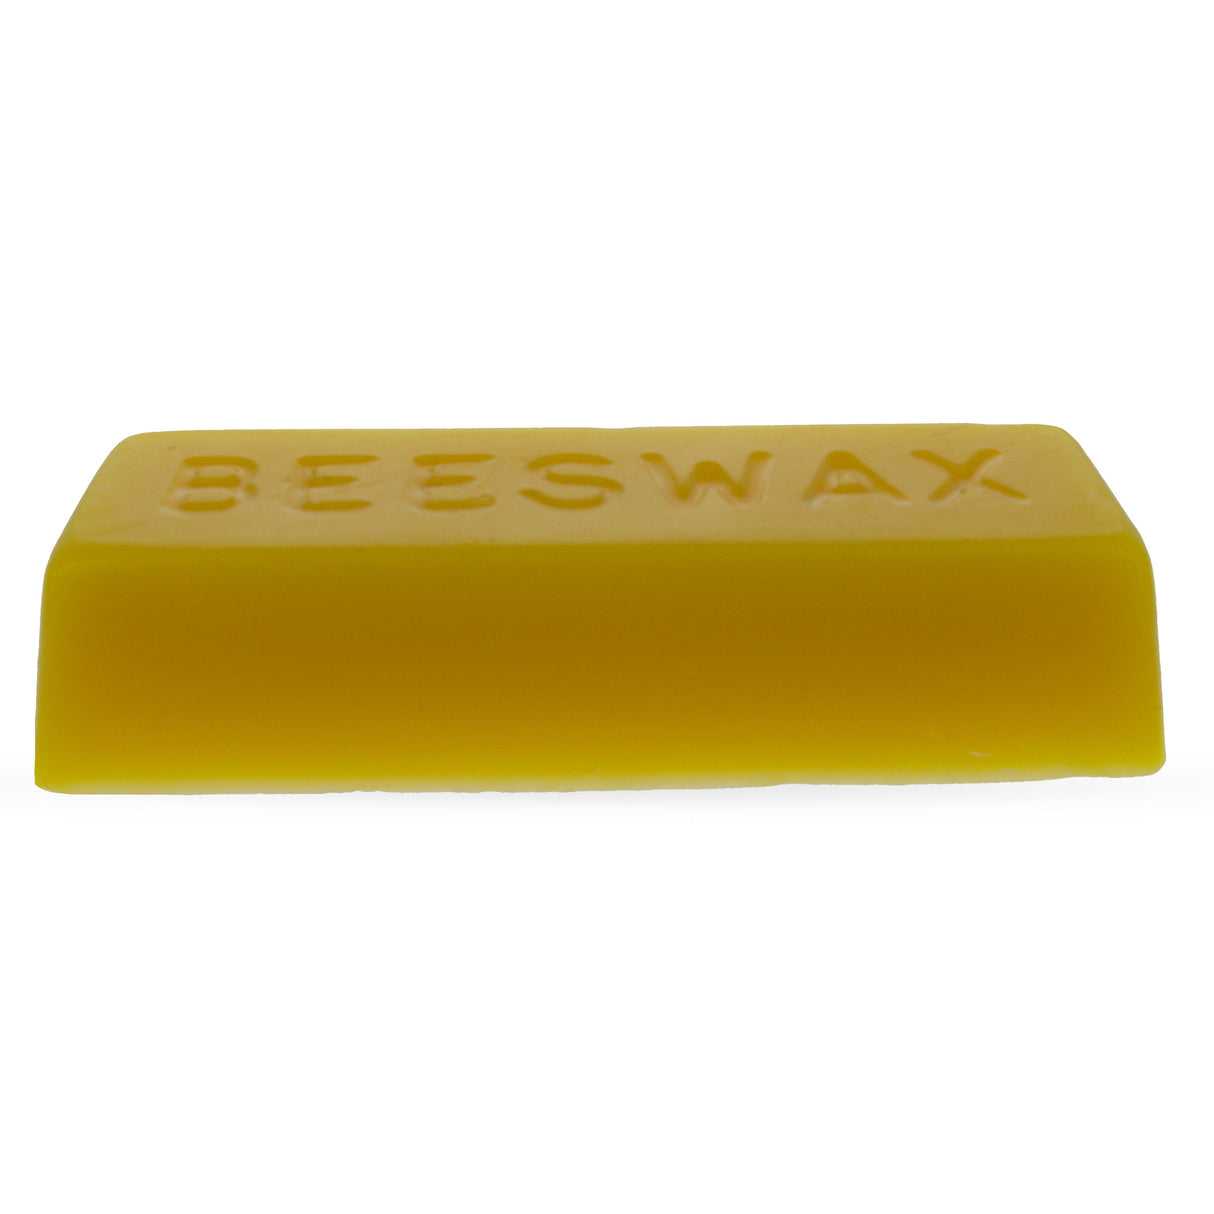 Buy Egg Decorating Beeswax by BestPysanky Online Gift Ship